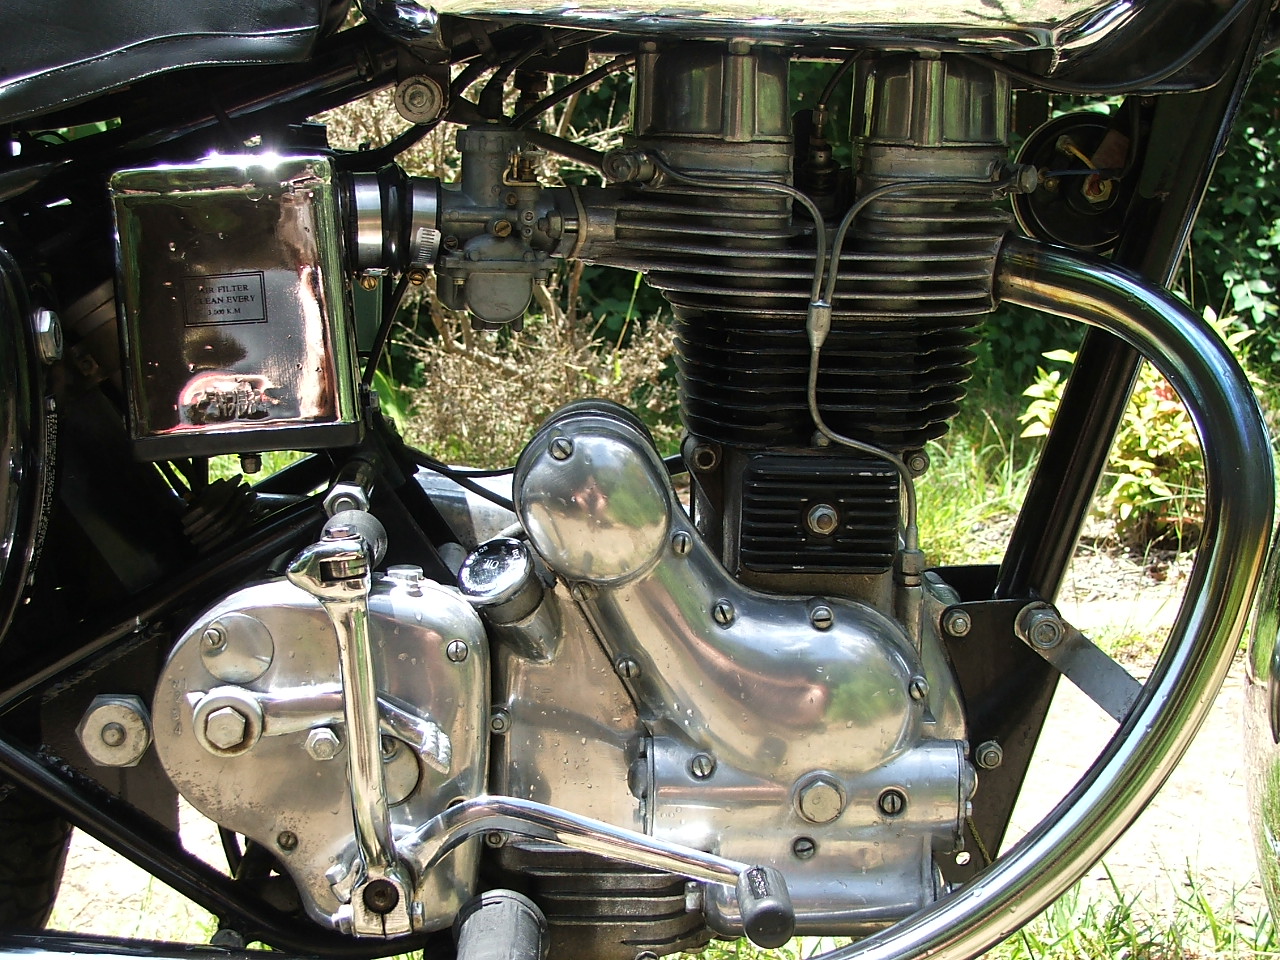 Engine closeup, right, 350 enfield